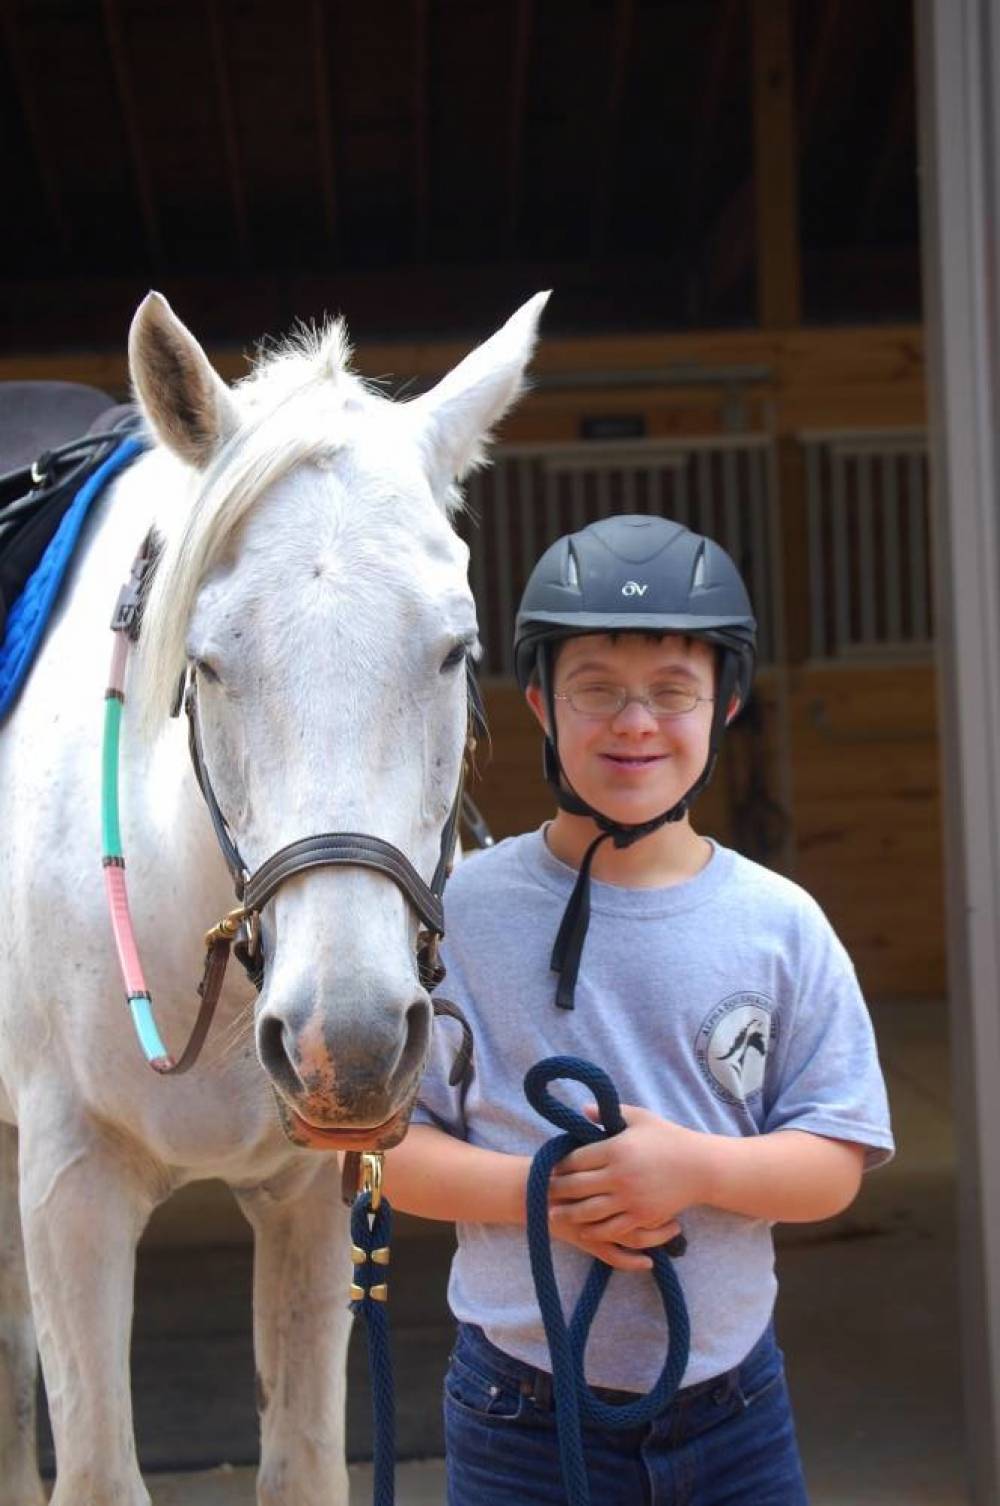 TOP GEORGIA SUMMER CAMP: Heaven s Gait Therapeutic Riding is a Top Summer Camp located in Woodstock Georgia offering many fun and enriching camp programs. 